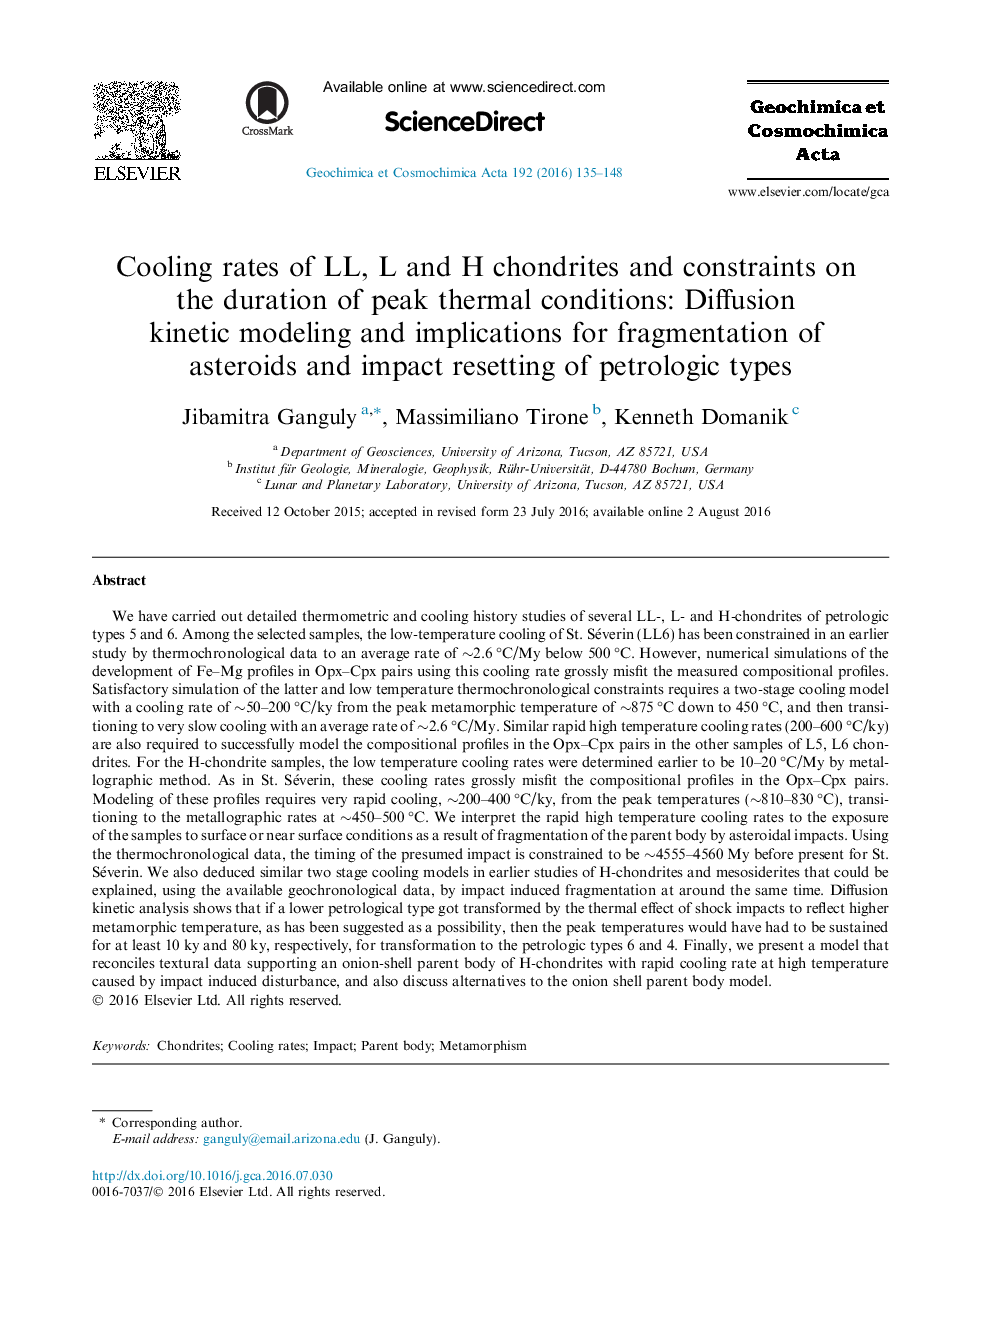 Cooling rates of LL, L and H chondrites and constraints on the duration of peak thermal conditions: Diffusion kinetic modeling and implications for fragmentation of asteroids and impact resetting of petrologic types